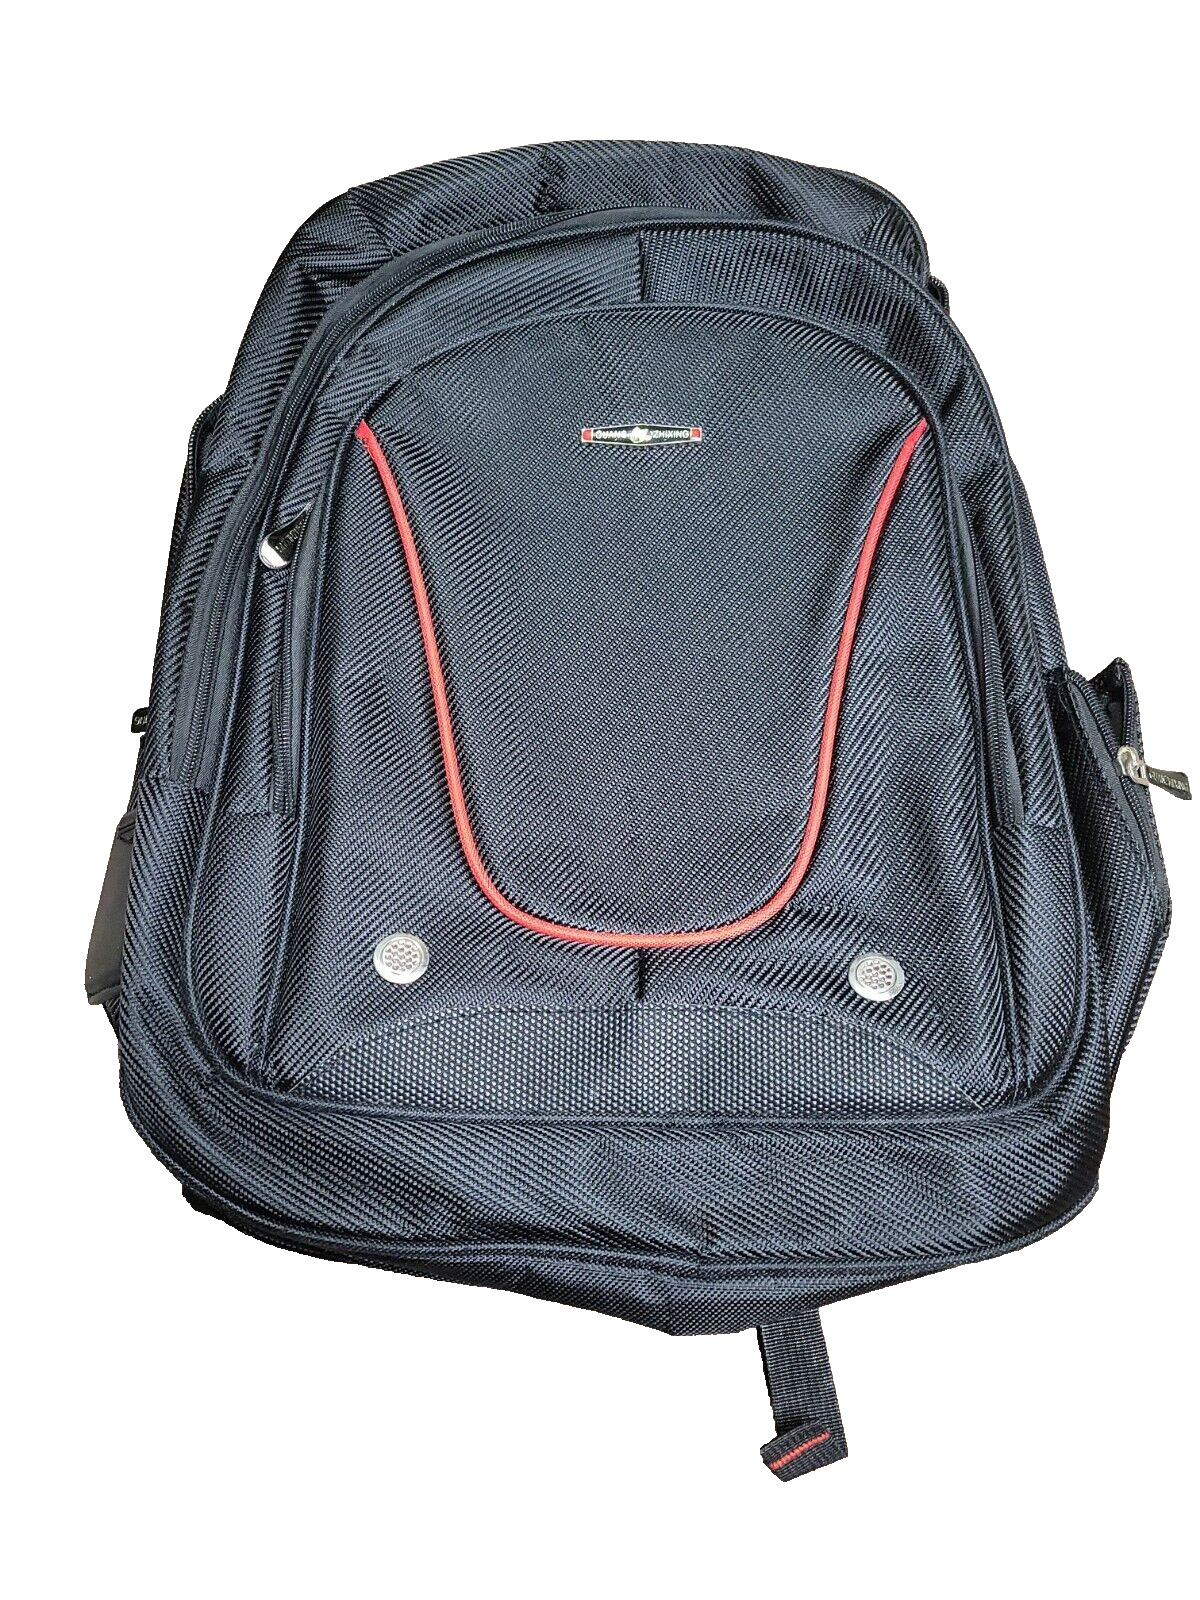 Wenger Synergy 16” Laptop Backpack Swiss Gear Performance